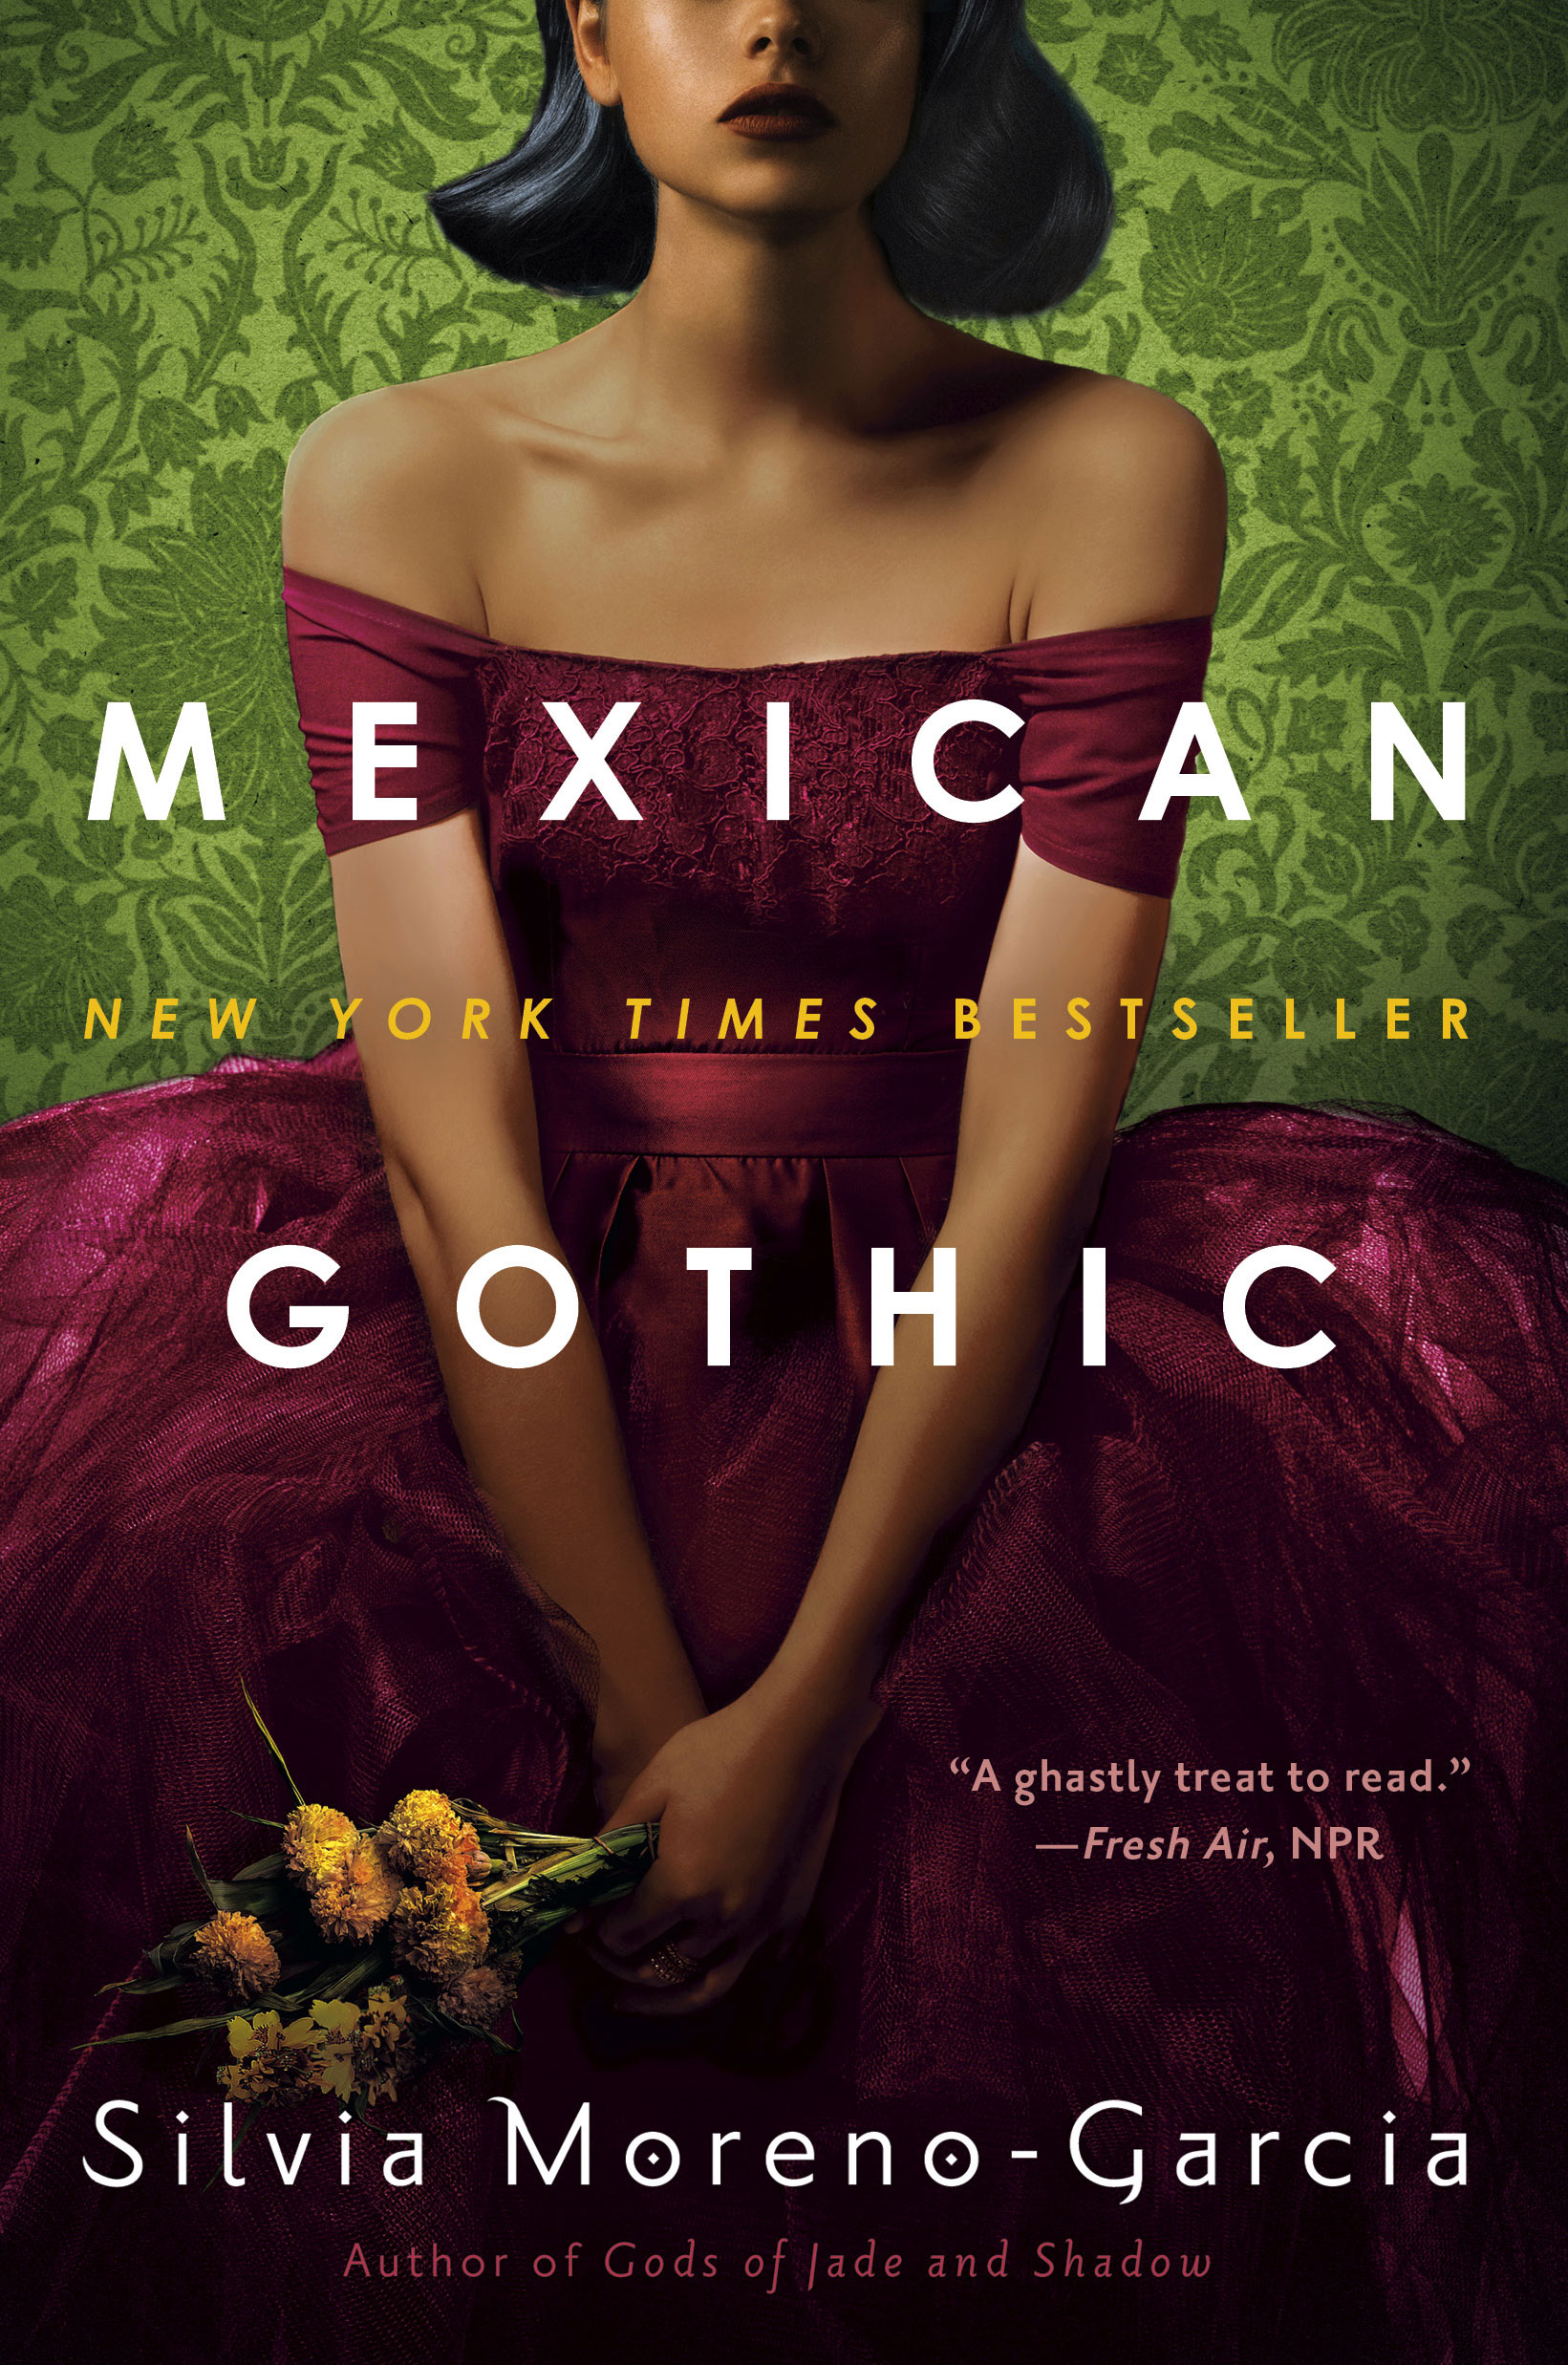 Mexican Gothic novel.